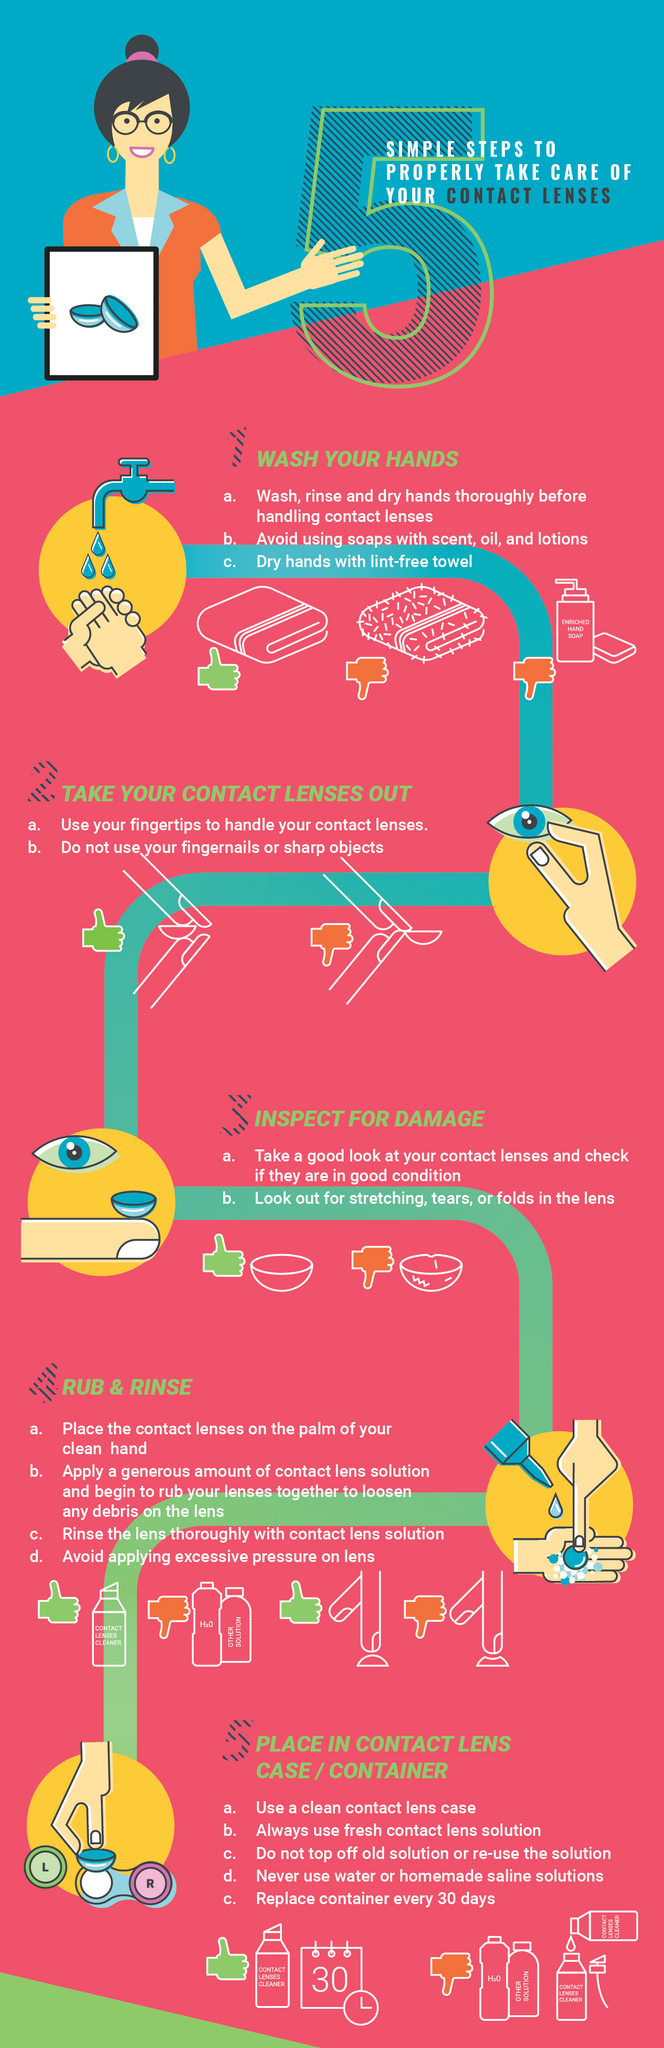 A five step guide on properly taking care of prescription contact lenses to reduce the risk of eye hazards and infections